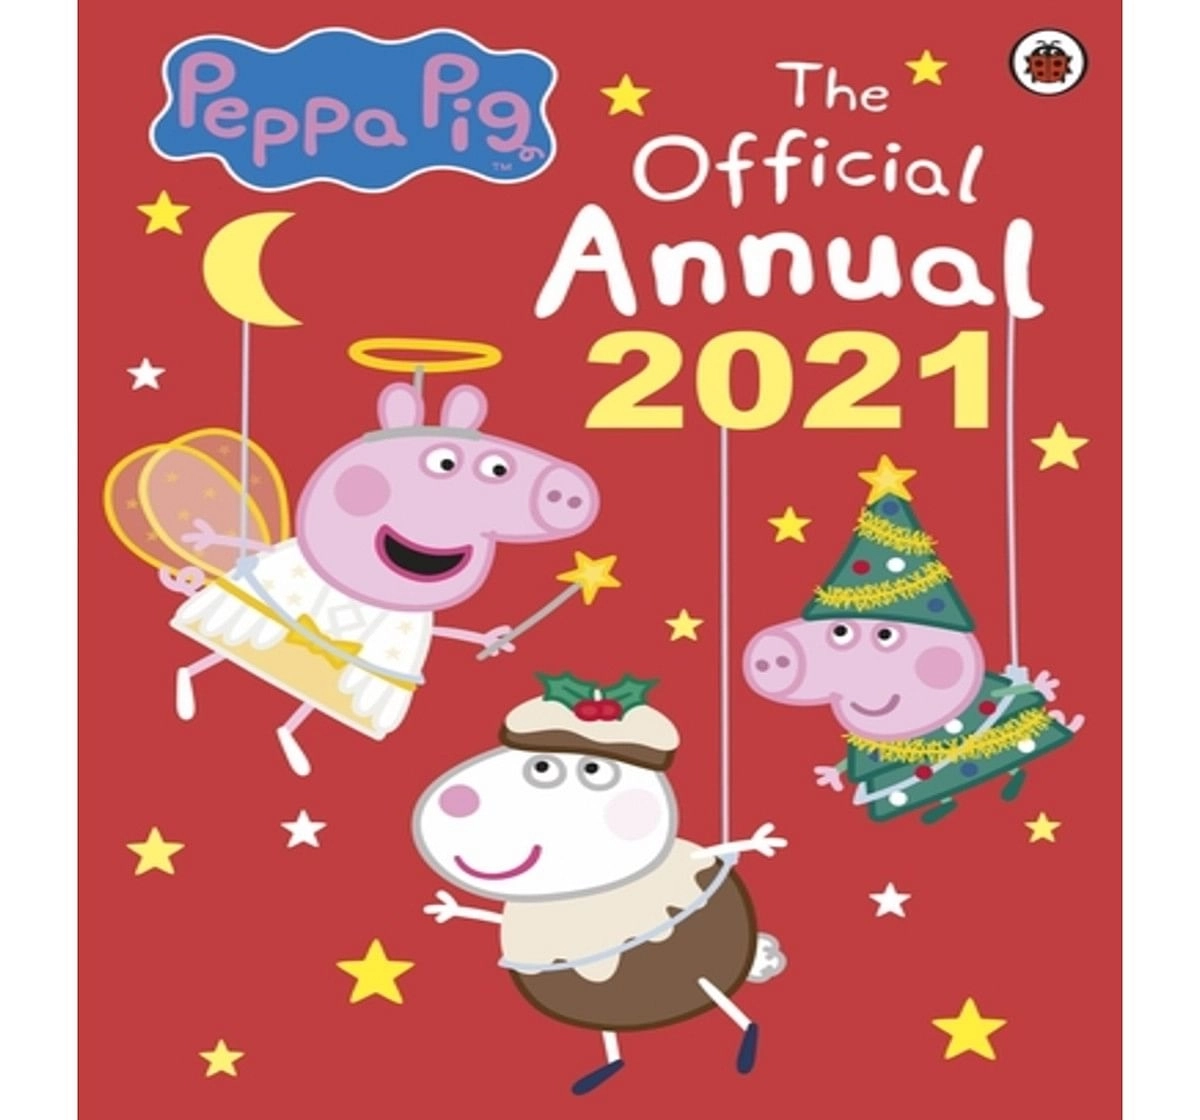 Peppa Pig: The Official Annual 2021, 64 Pages Book by Ladybird, Hardback